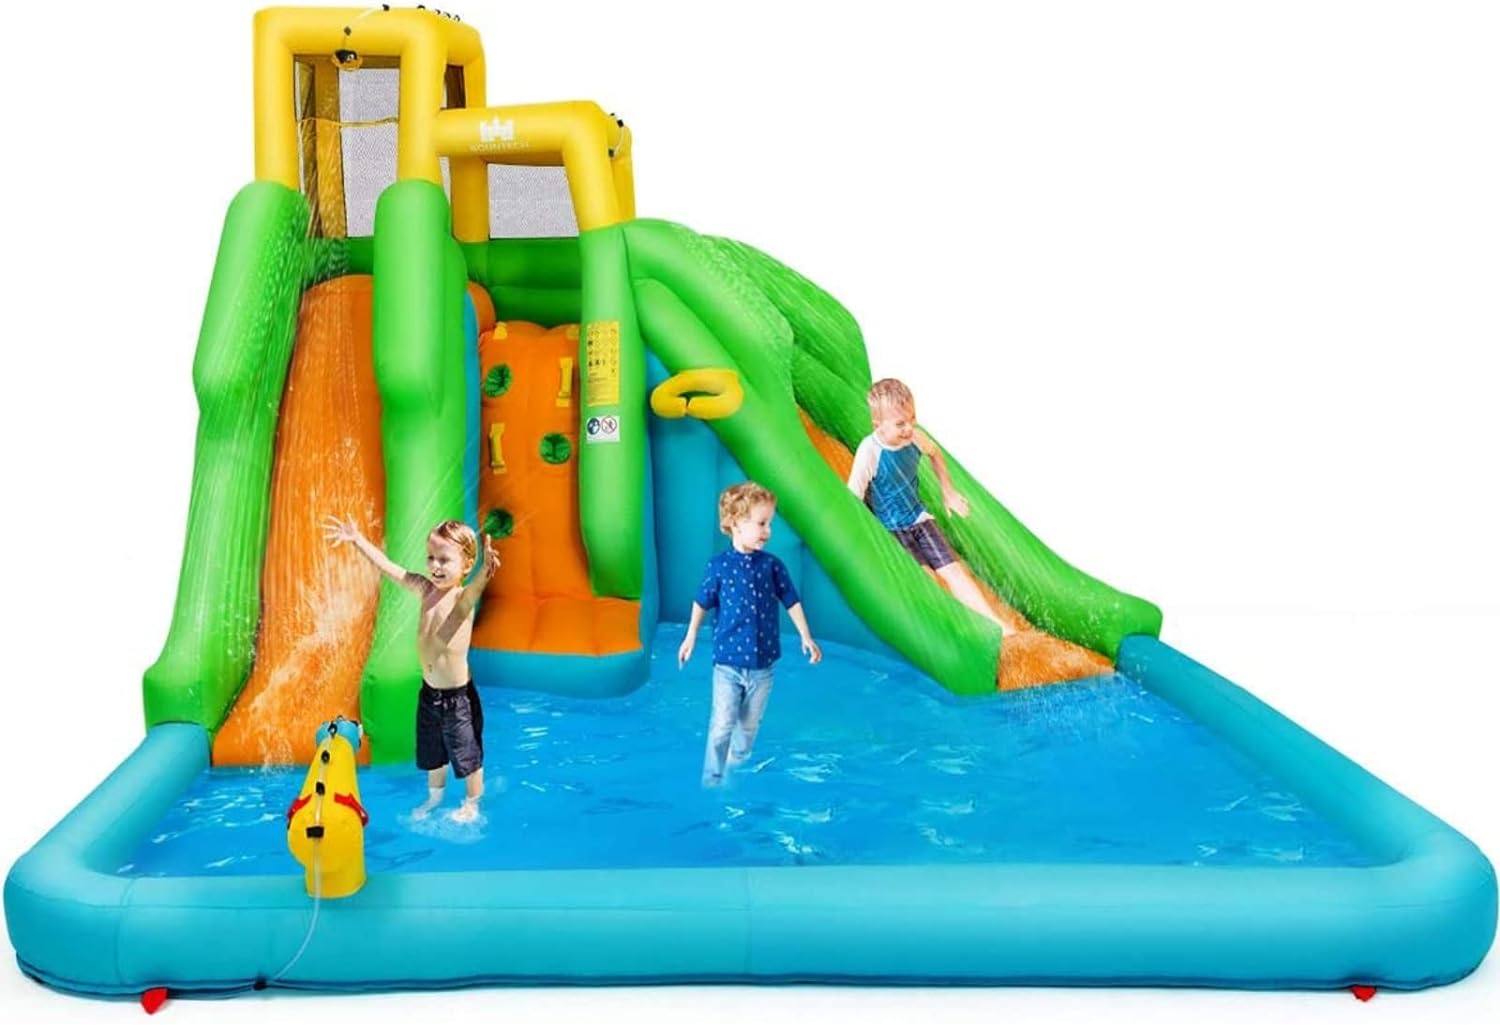 BOUNTECH Inflatable Water Slide, 6 in 1 Giant Water Park for Outdoor Fun with Climbing Wall, Splash Pool, Water Cannon, Water Slides Inflatables for Kids Backyard Party Gift Present (Without Blower)